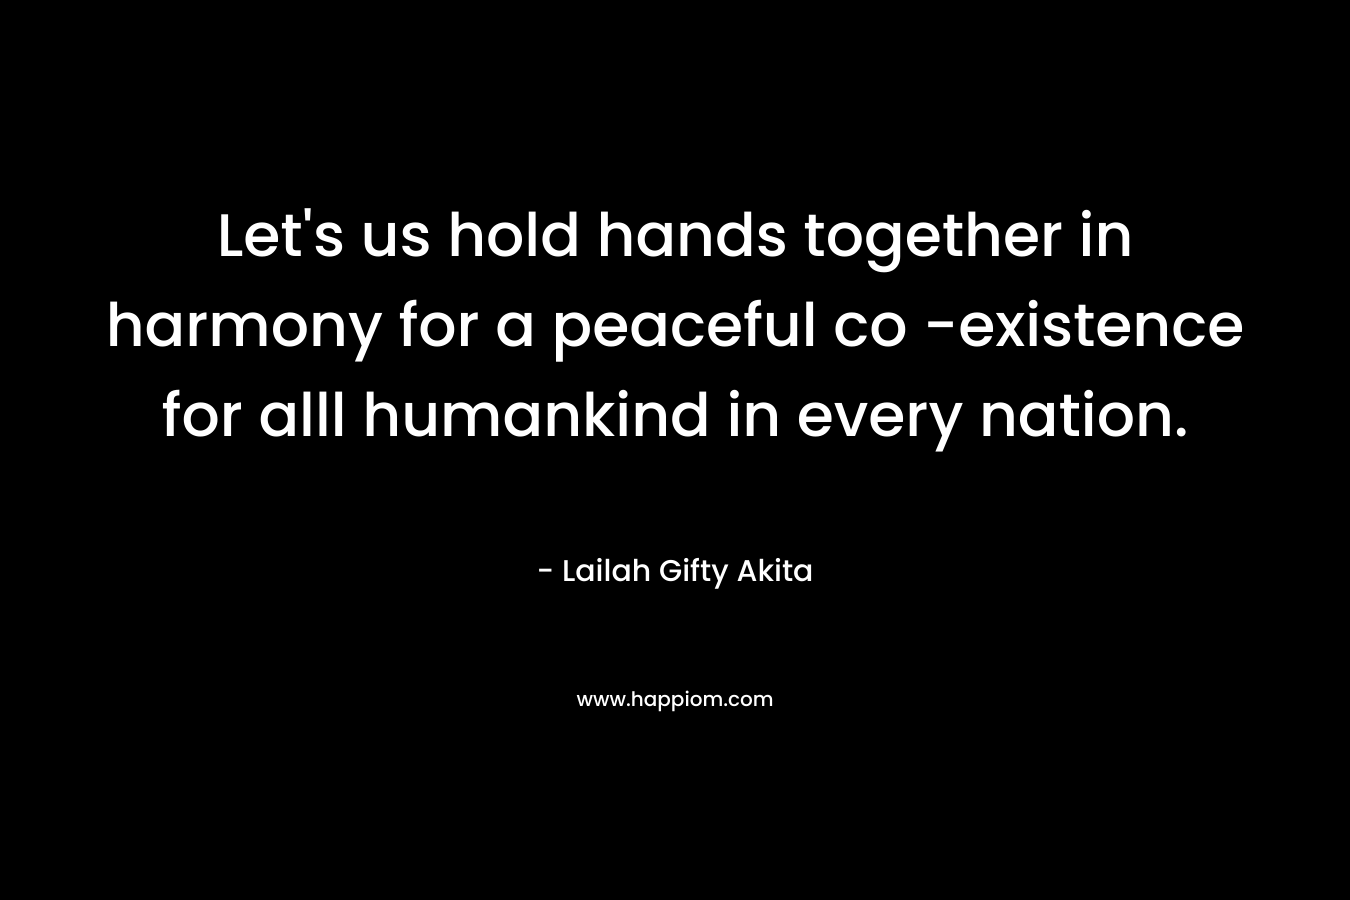 Let's us hold hands together in harmony for a peaceful co -existence for alll humankind in every nation.